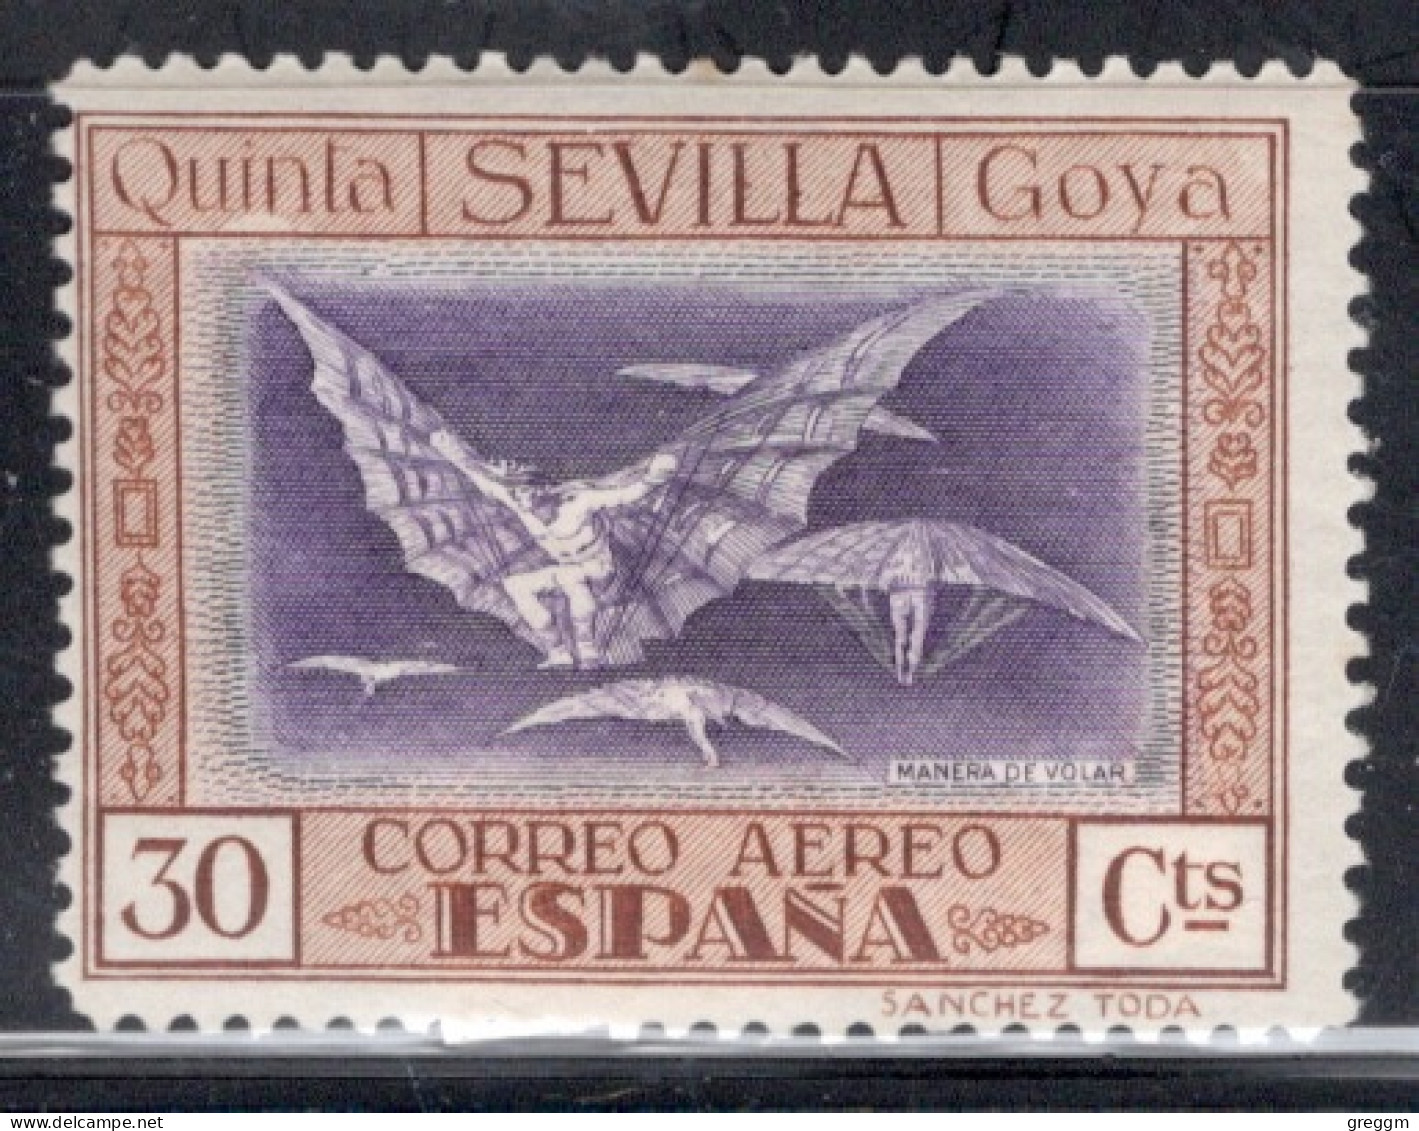 Spain 1930 Single Stamp Issued As An Airmail - The 100th Anniversary Of The Death Of Francisco De Goya In Mounted Mint - Ongebruikt